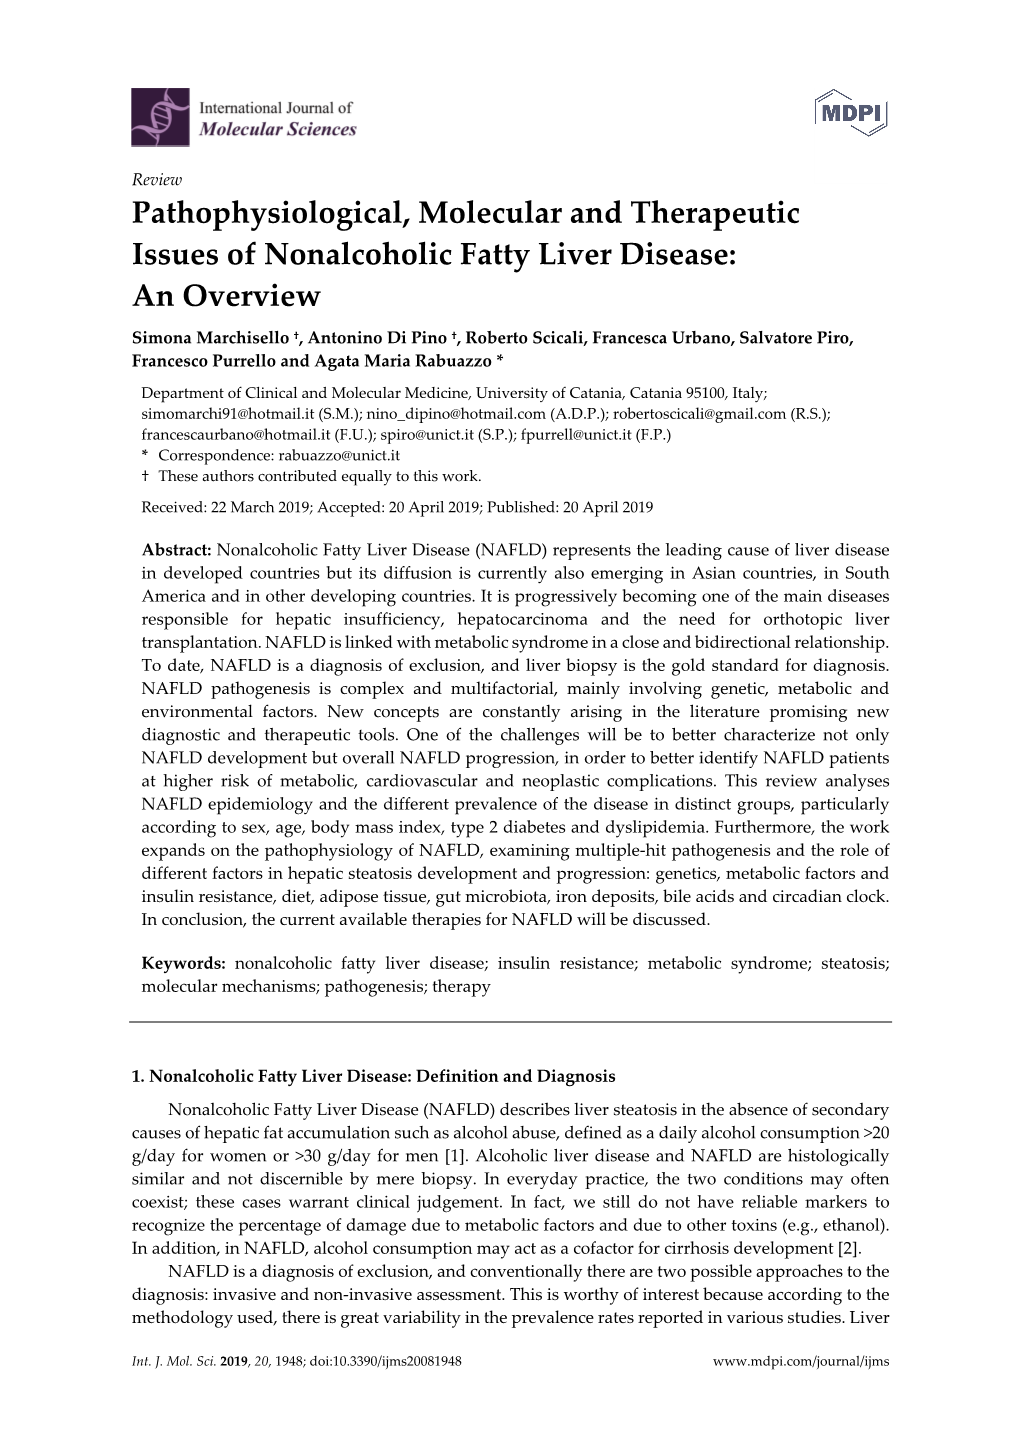 Pathophysiological, Molecular and Therapeutic Issues of Nonalcoholic Fatty Liver Disease: an Overview